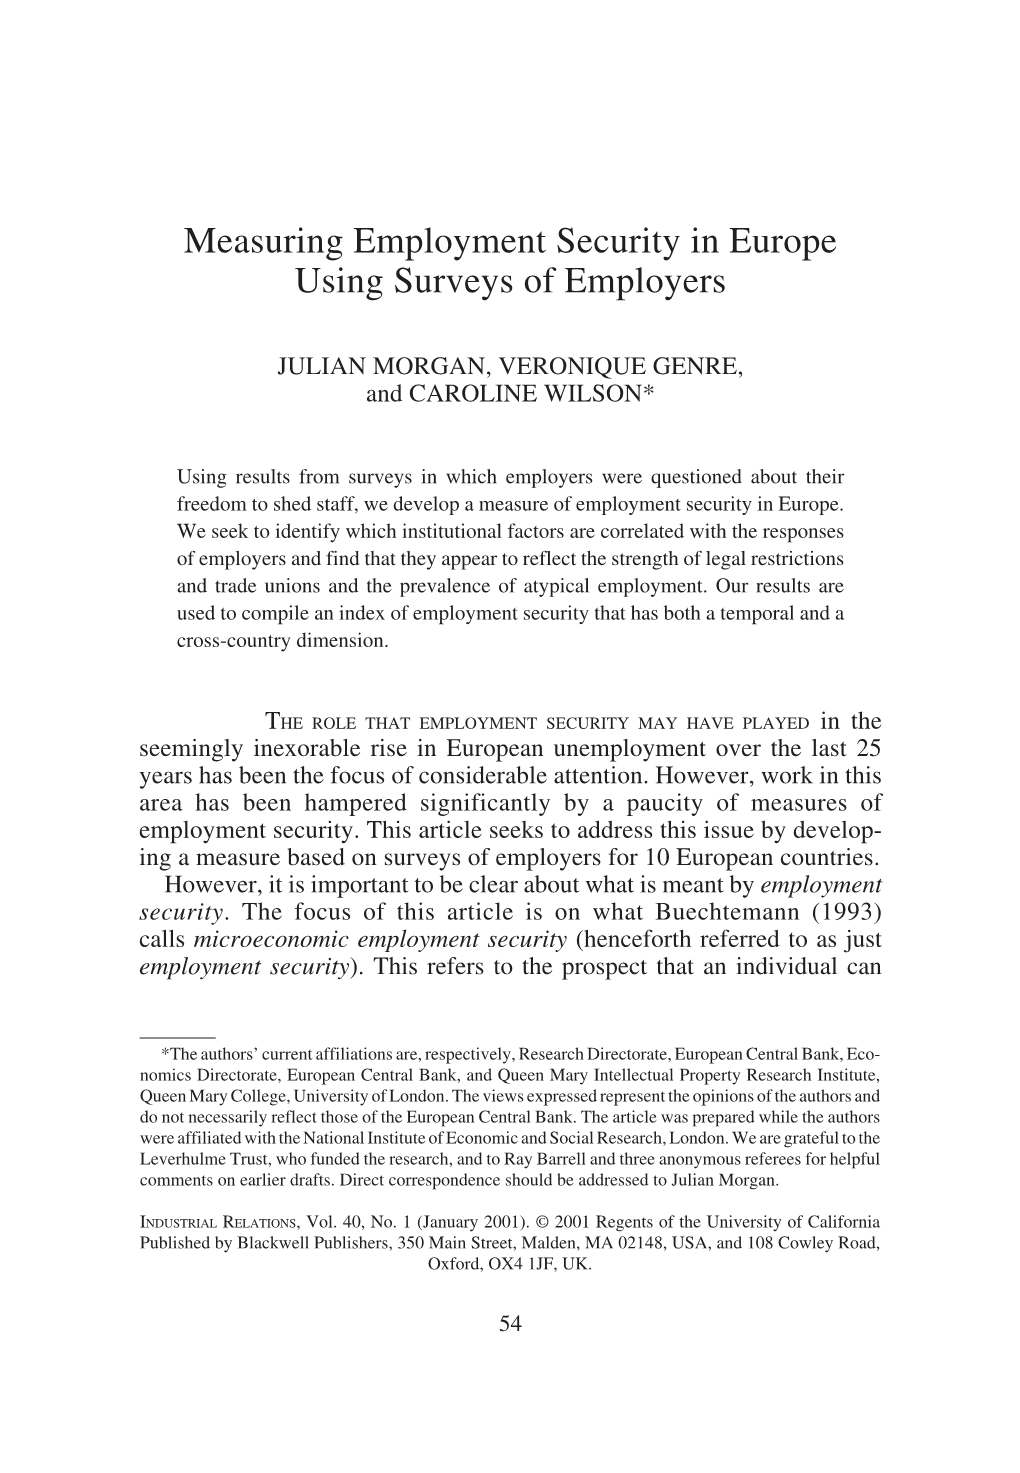 Measuring Employment Security in Europe Using Surveys of Employers